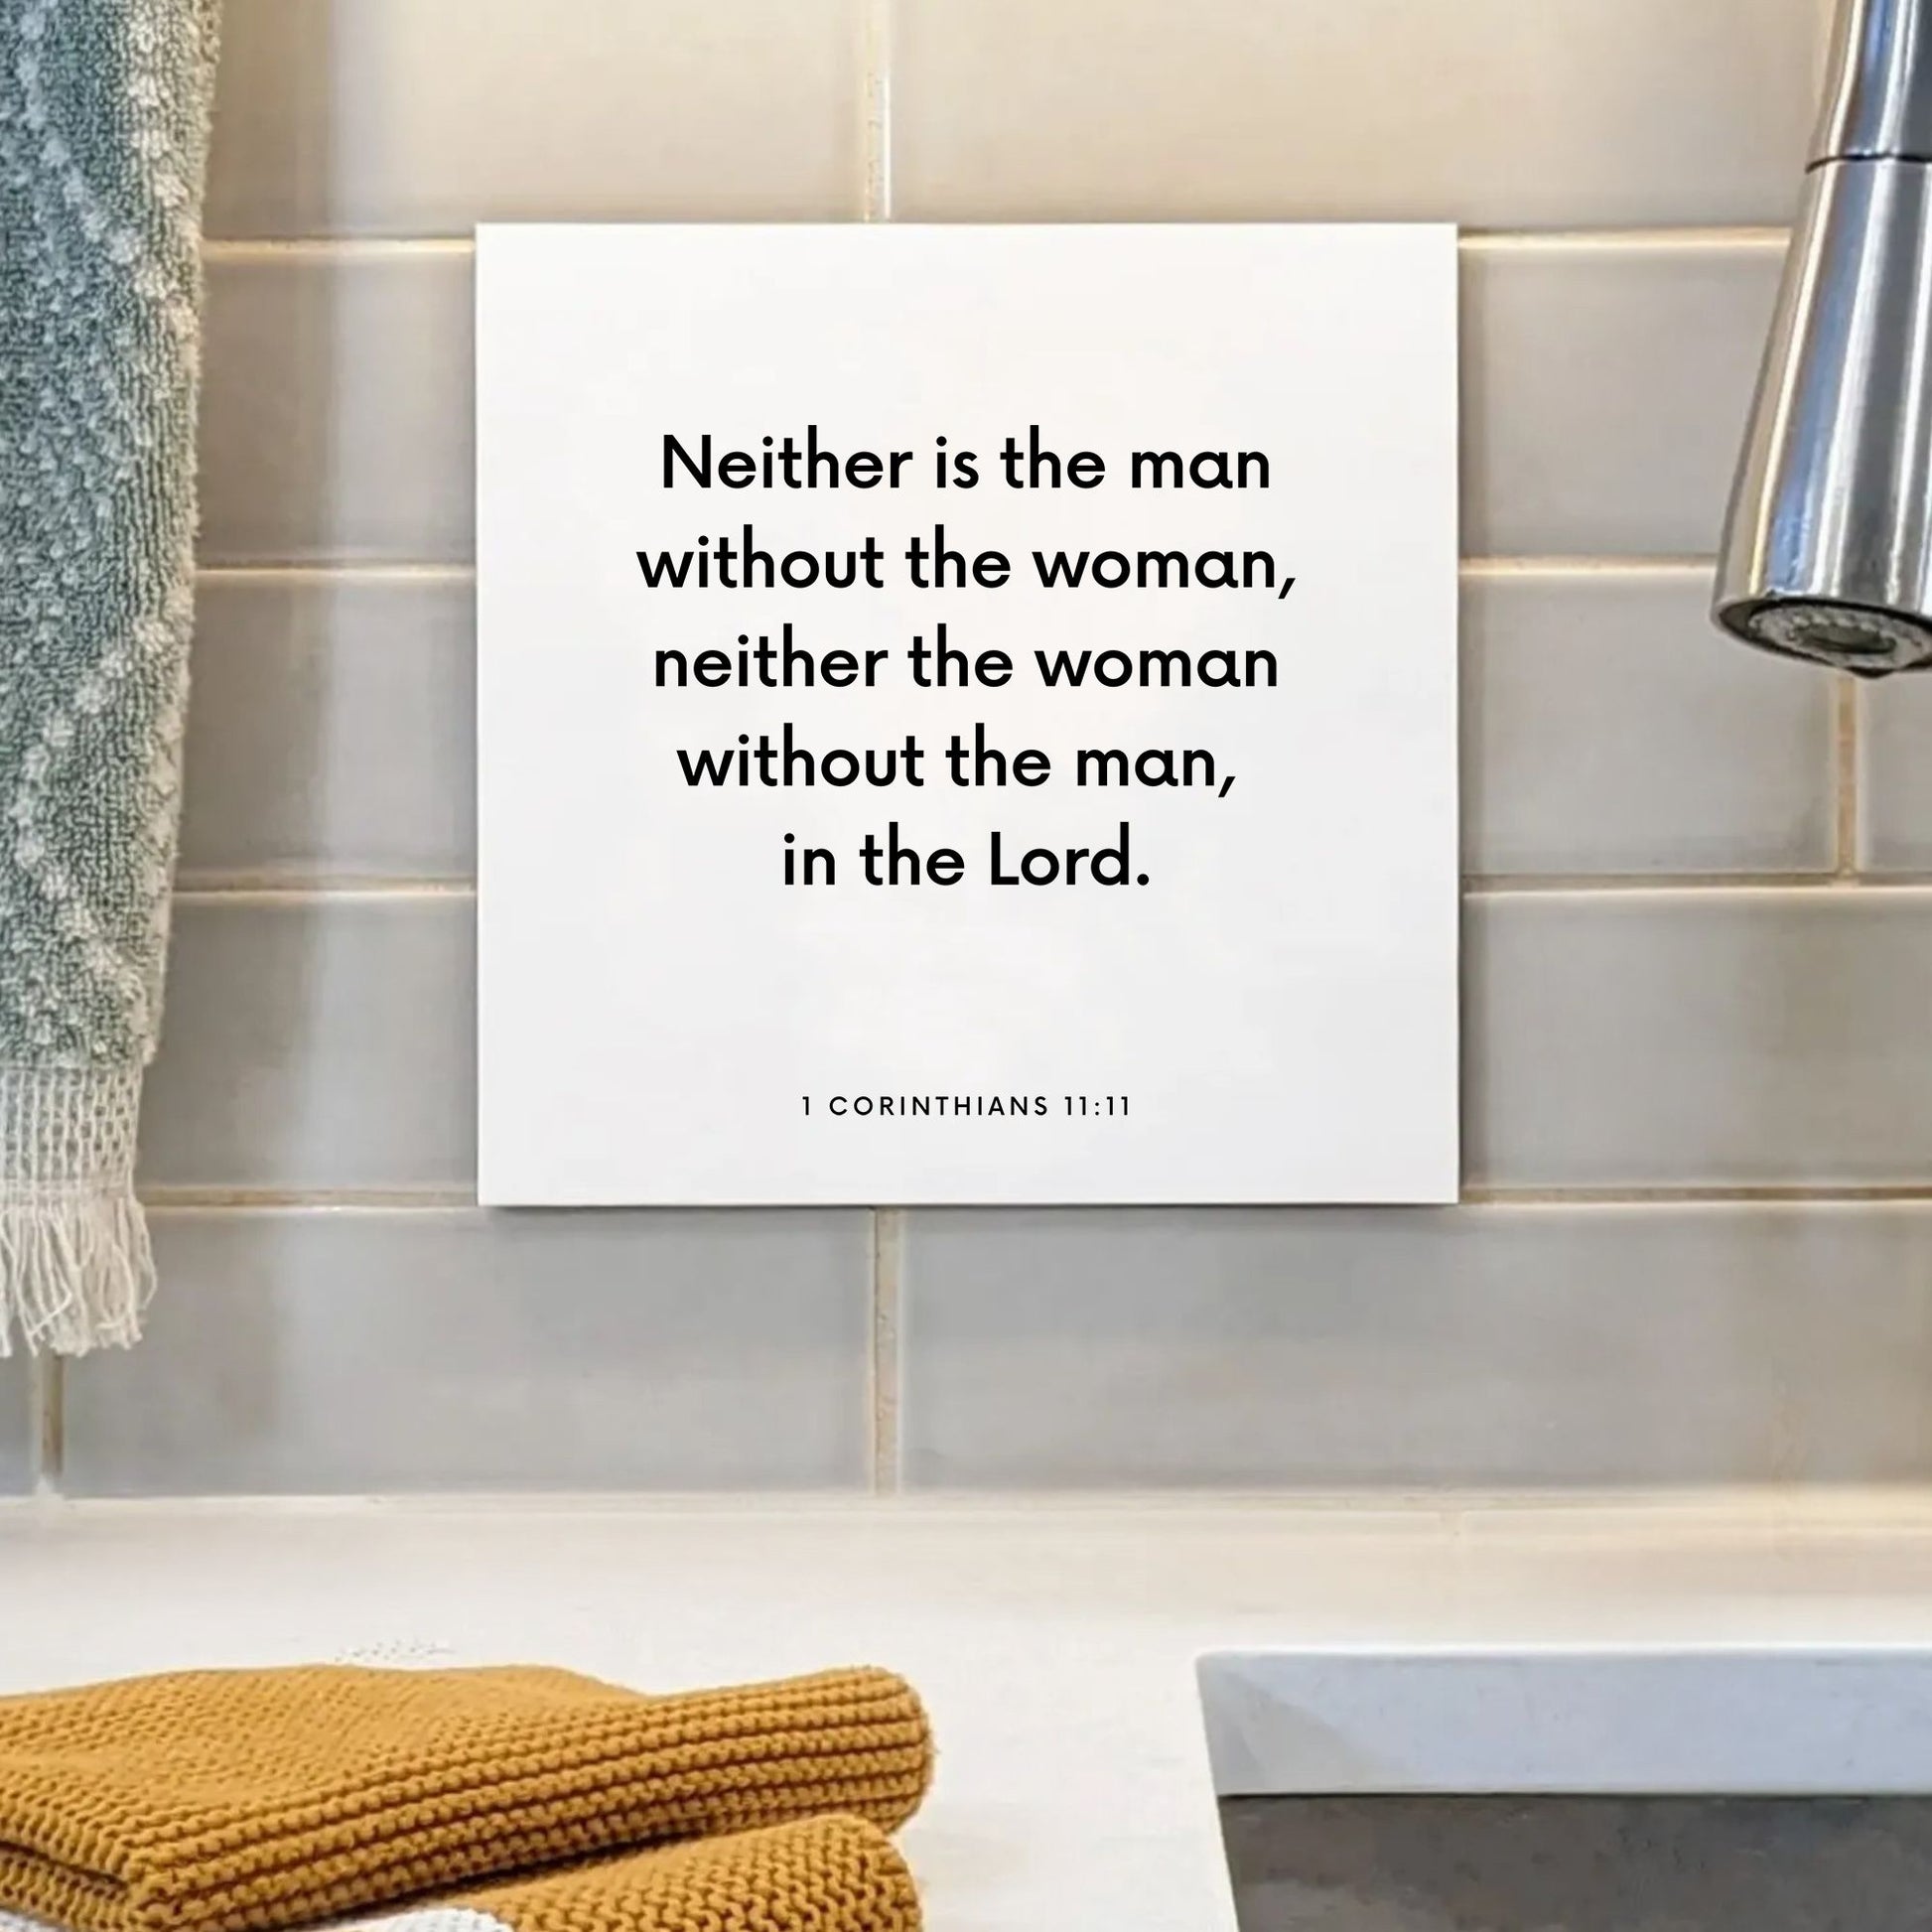 Sink mouting of the scripture tile for 1 Corinthians 11:11 - "Neither is the man without the woman, in the lord"